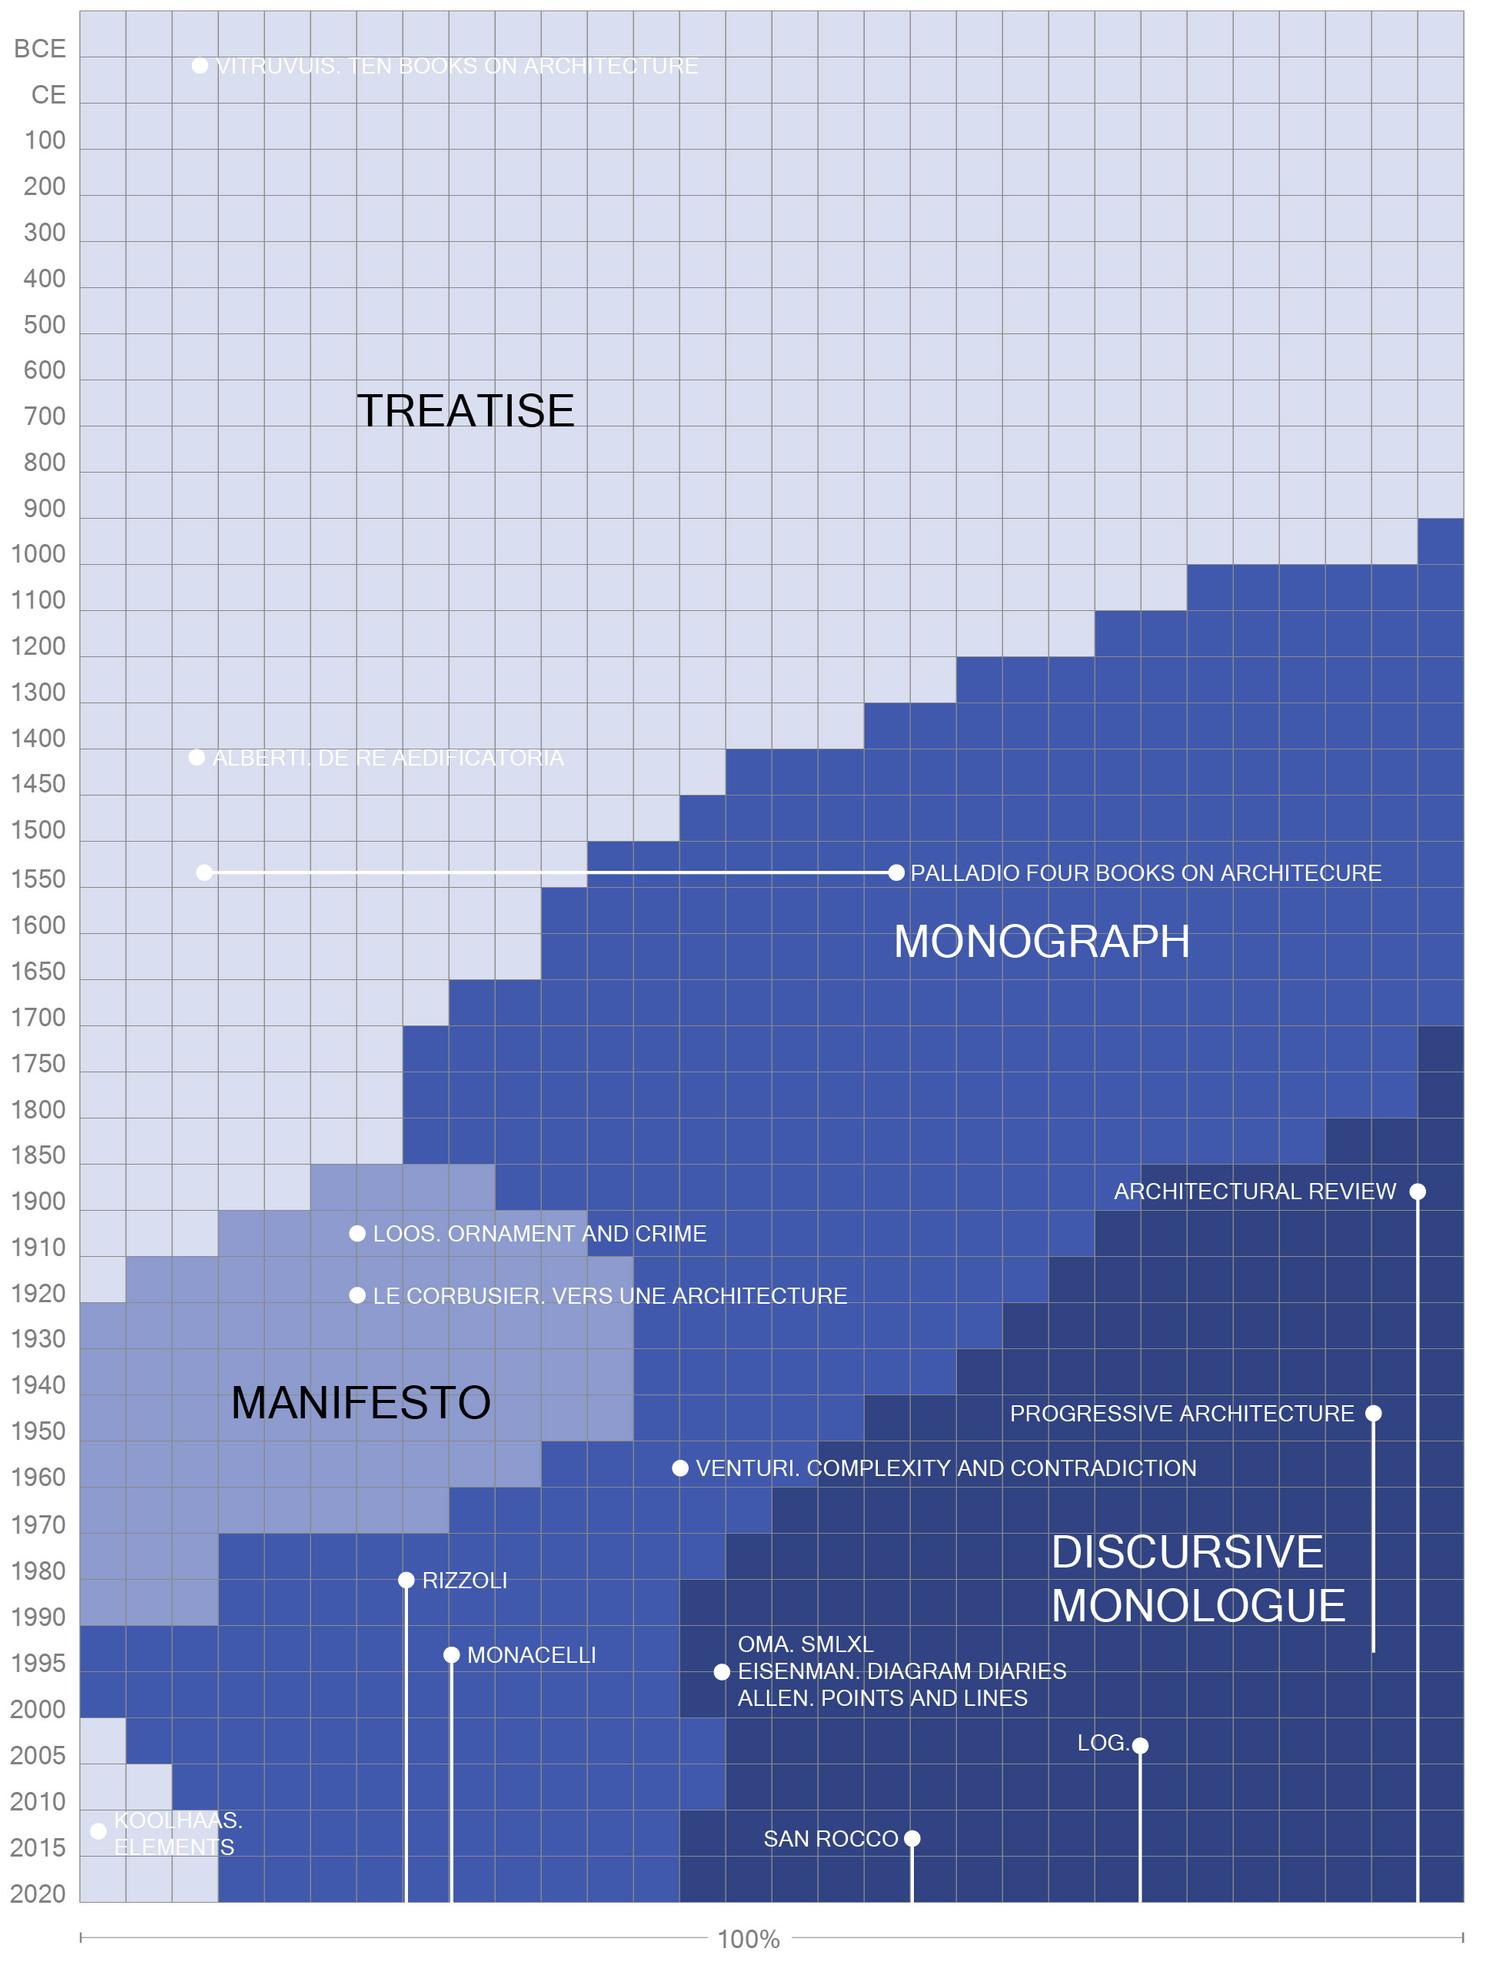 Diagram of the influence of text over time in architecture, highlighting key moments in history architects communicated concepts through treatises, manifestos, monographs, and discursive monologues.